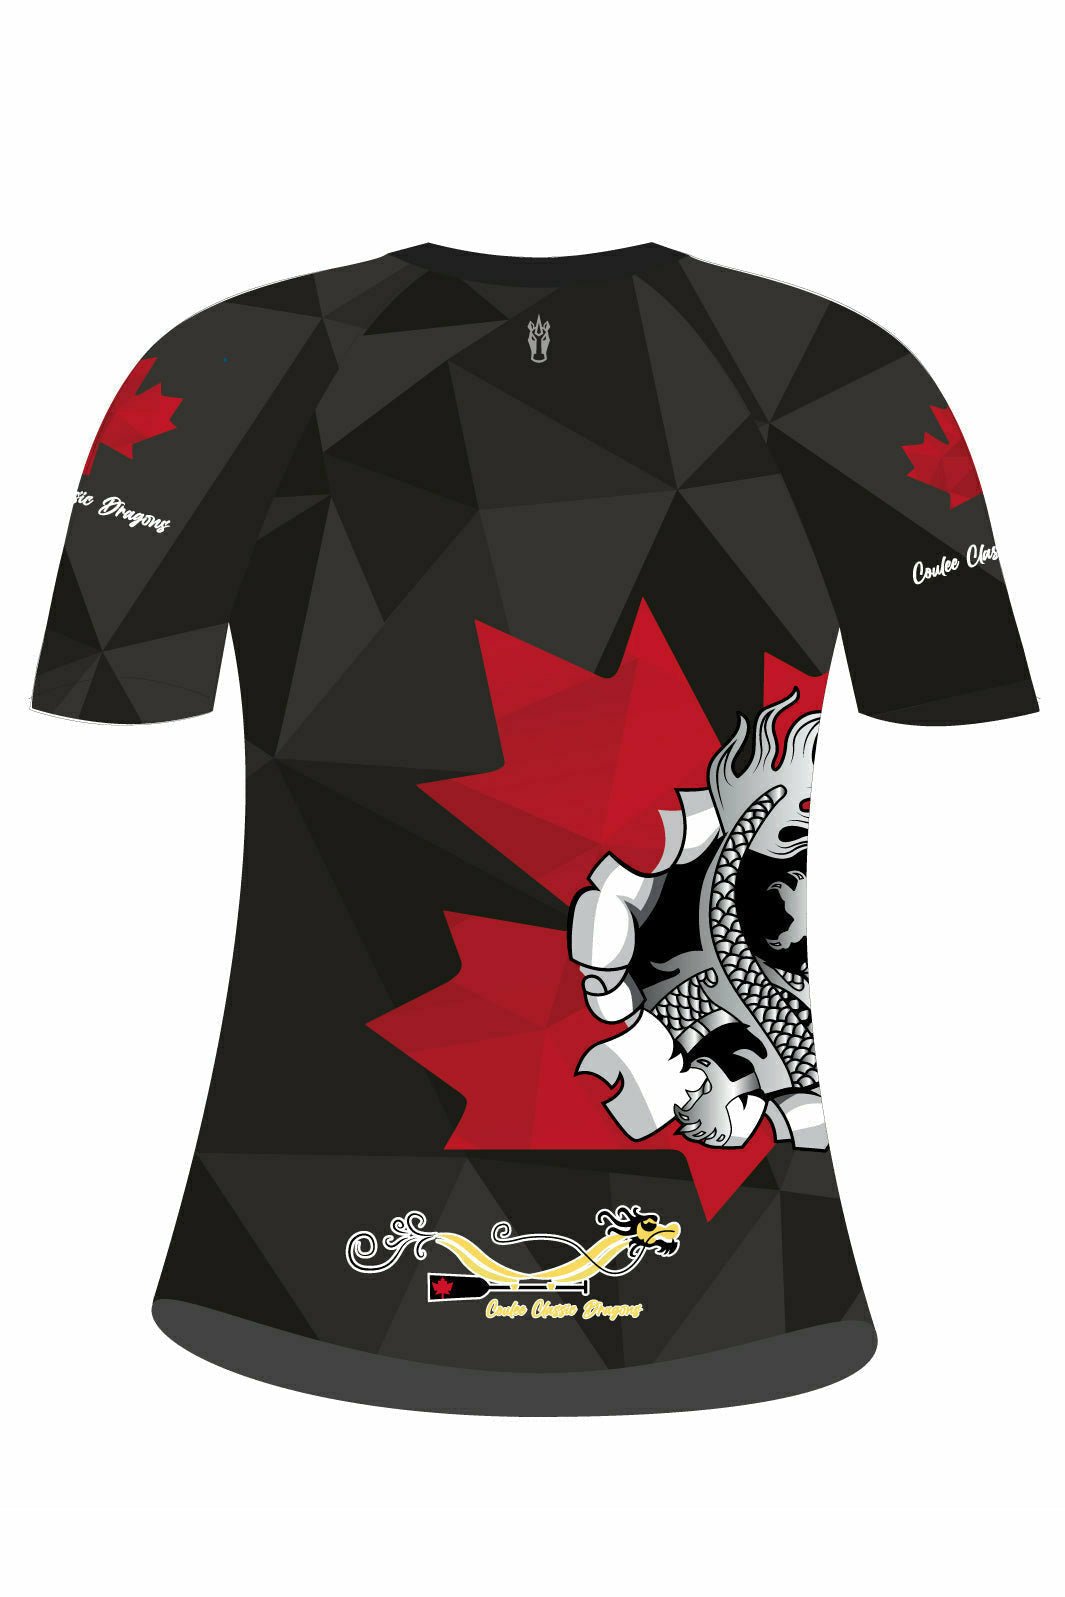 Coulee Classic Dragons Women's h2O Performance Jersey Short Sleeve - Oddball Workshop